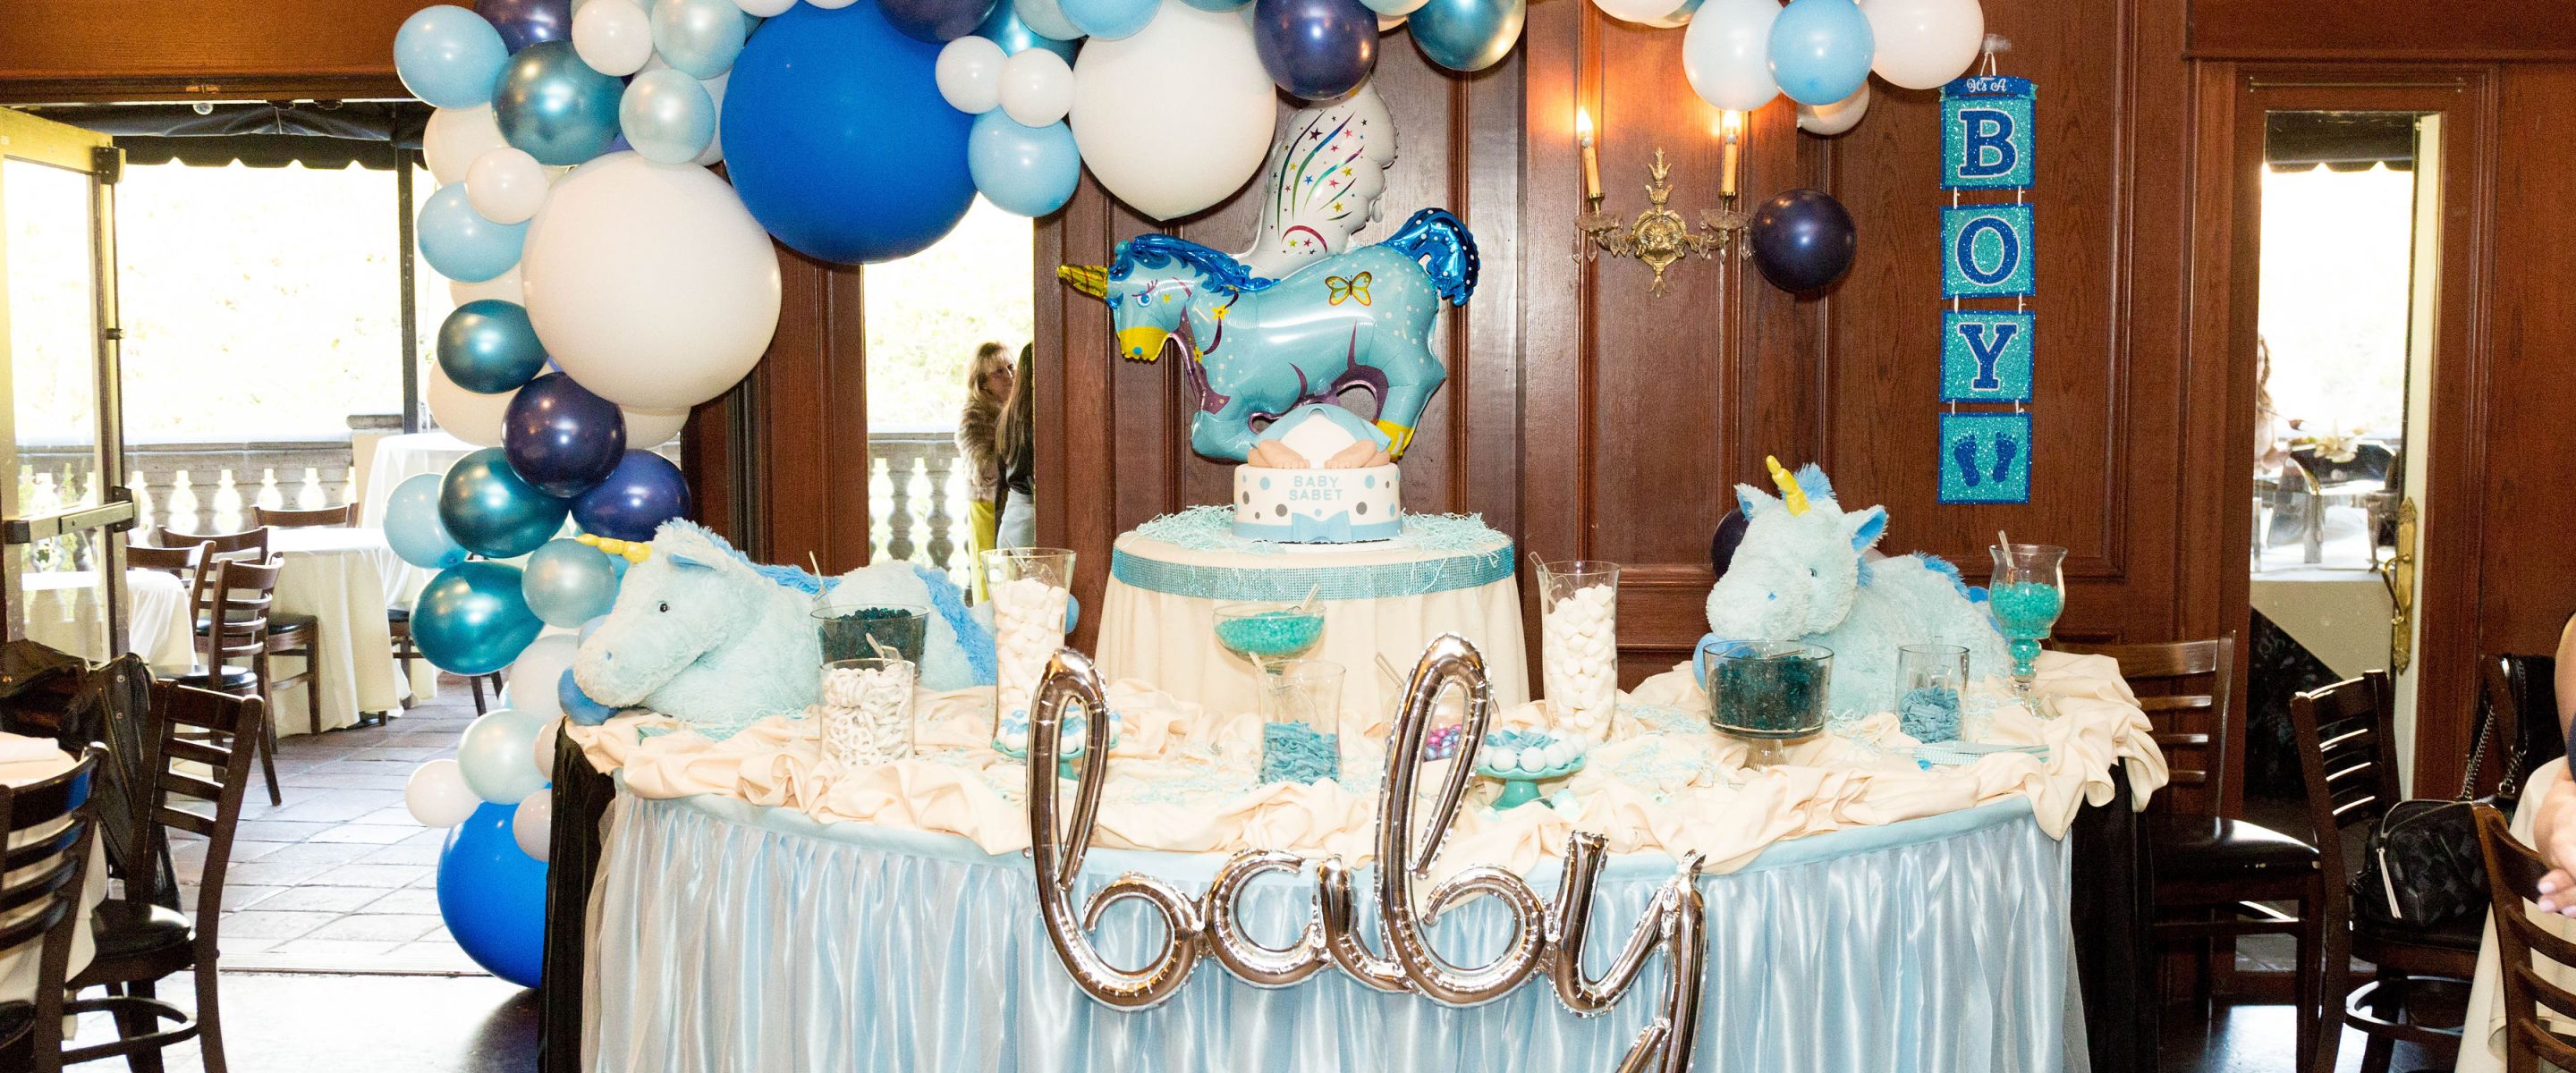 How To Have A Budget-Friendly Baby Shower